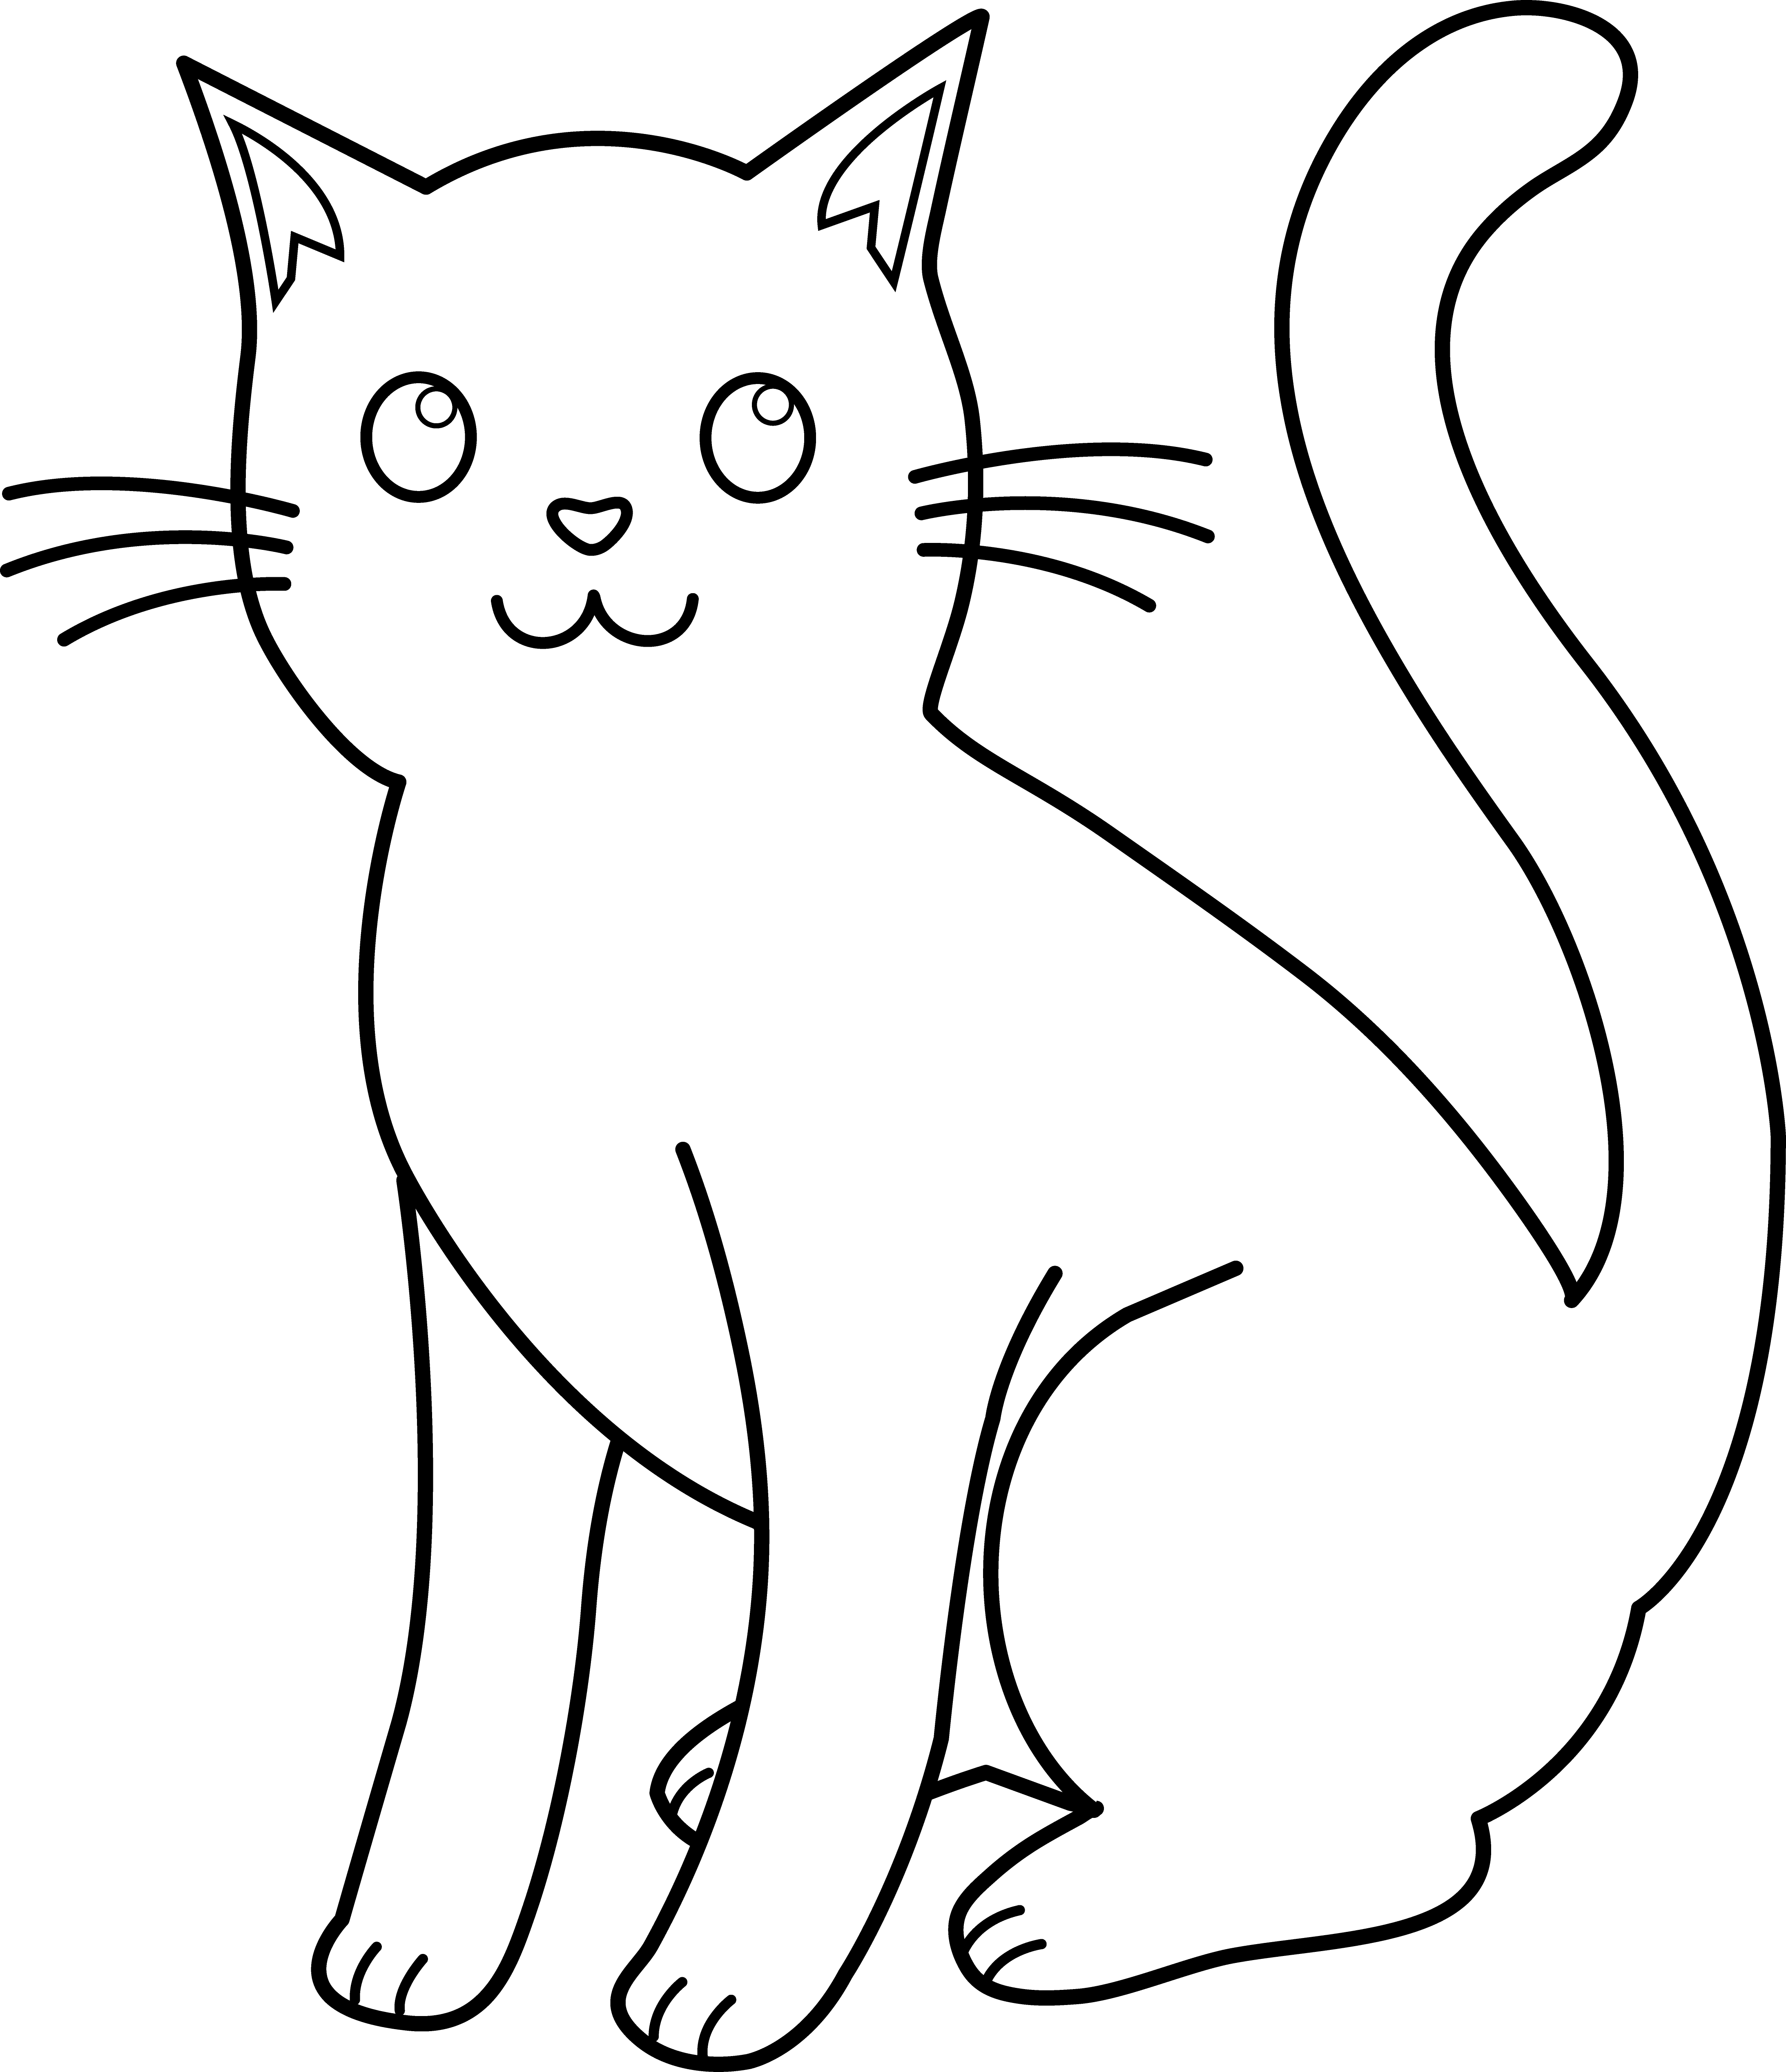 Black and White Cat Lineart - Free Clip Art